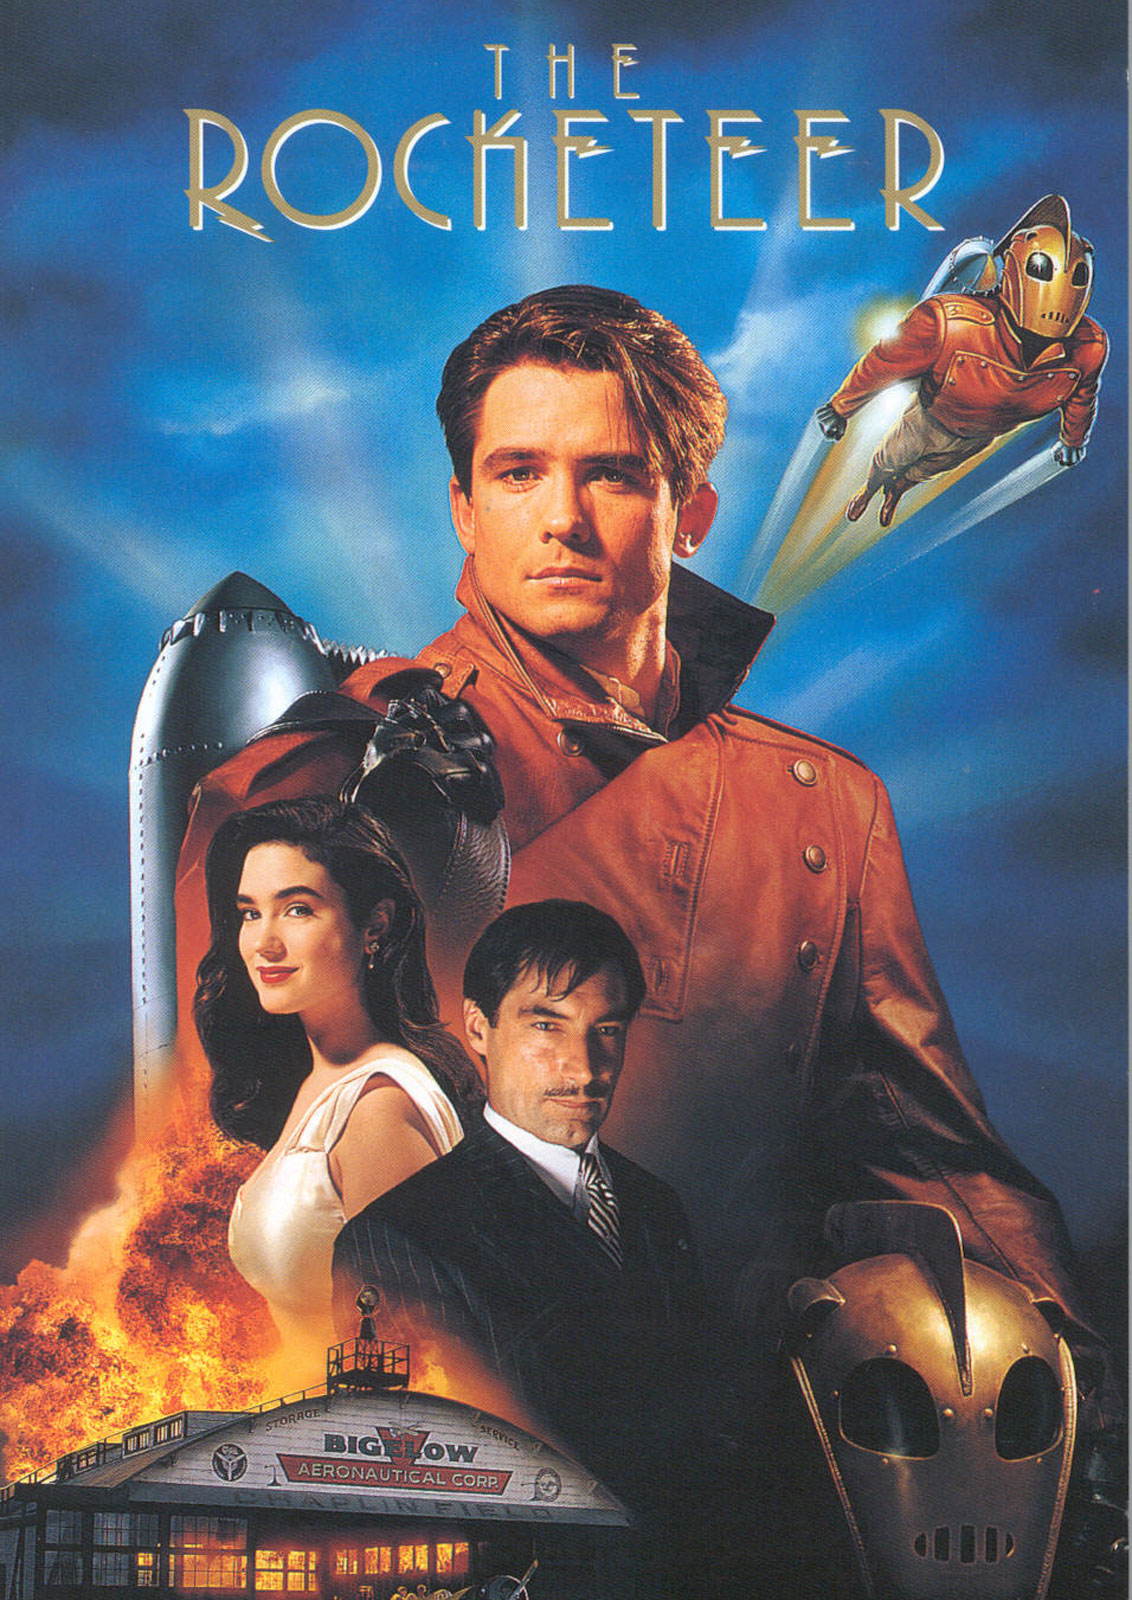 The Rocketeer (1991) | Cinemorgue Wiki | FANDOM powered by Wikia